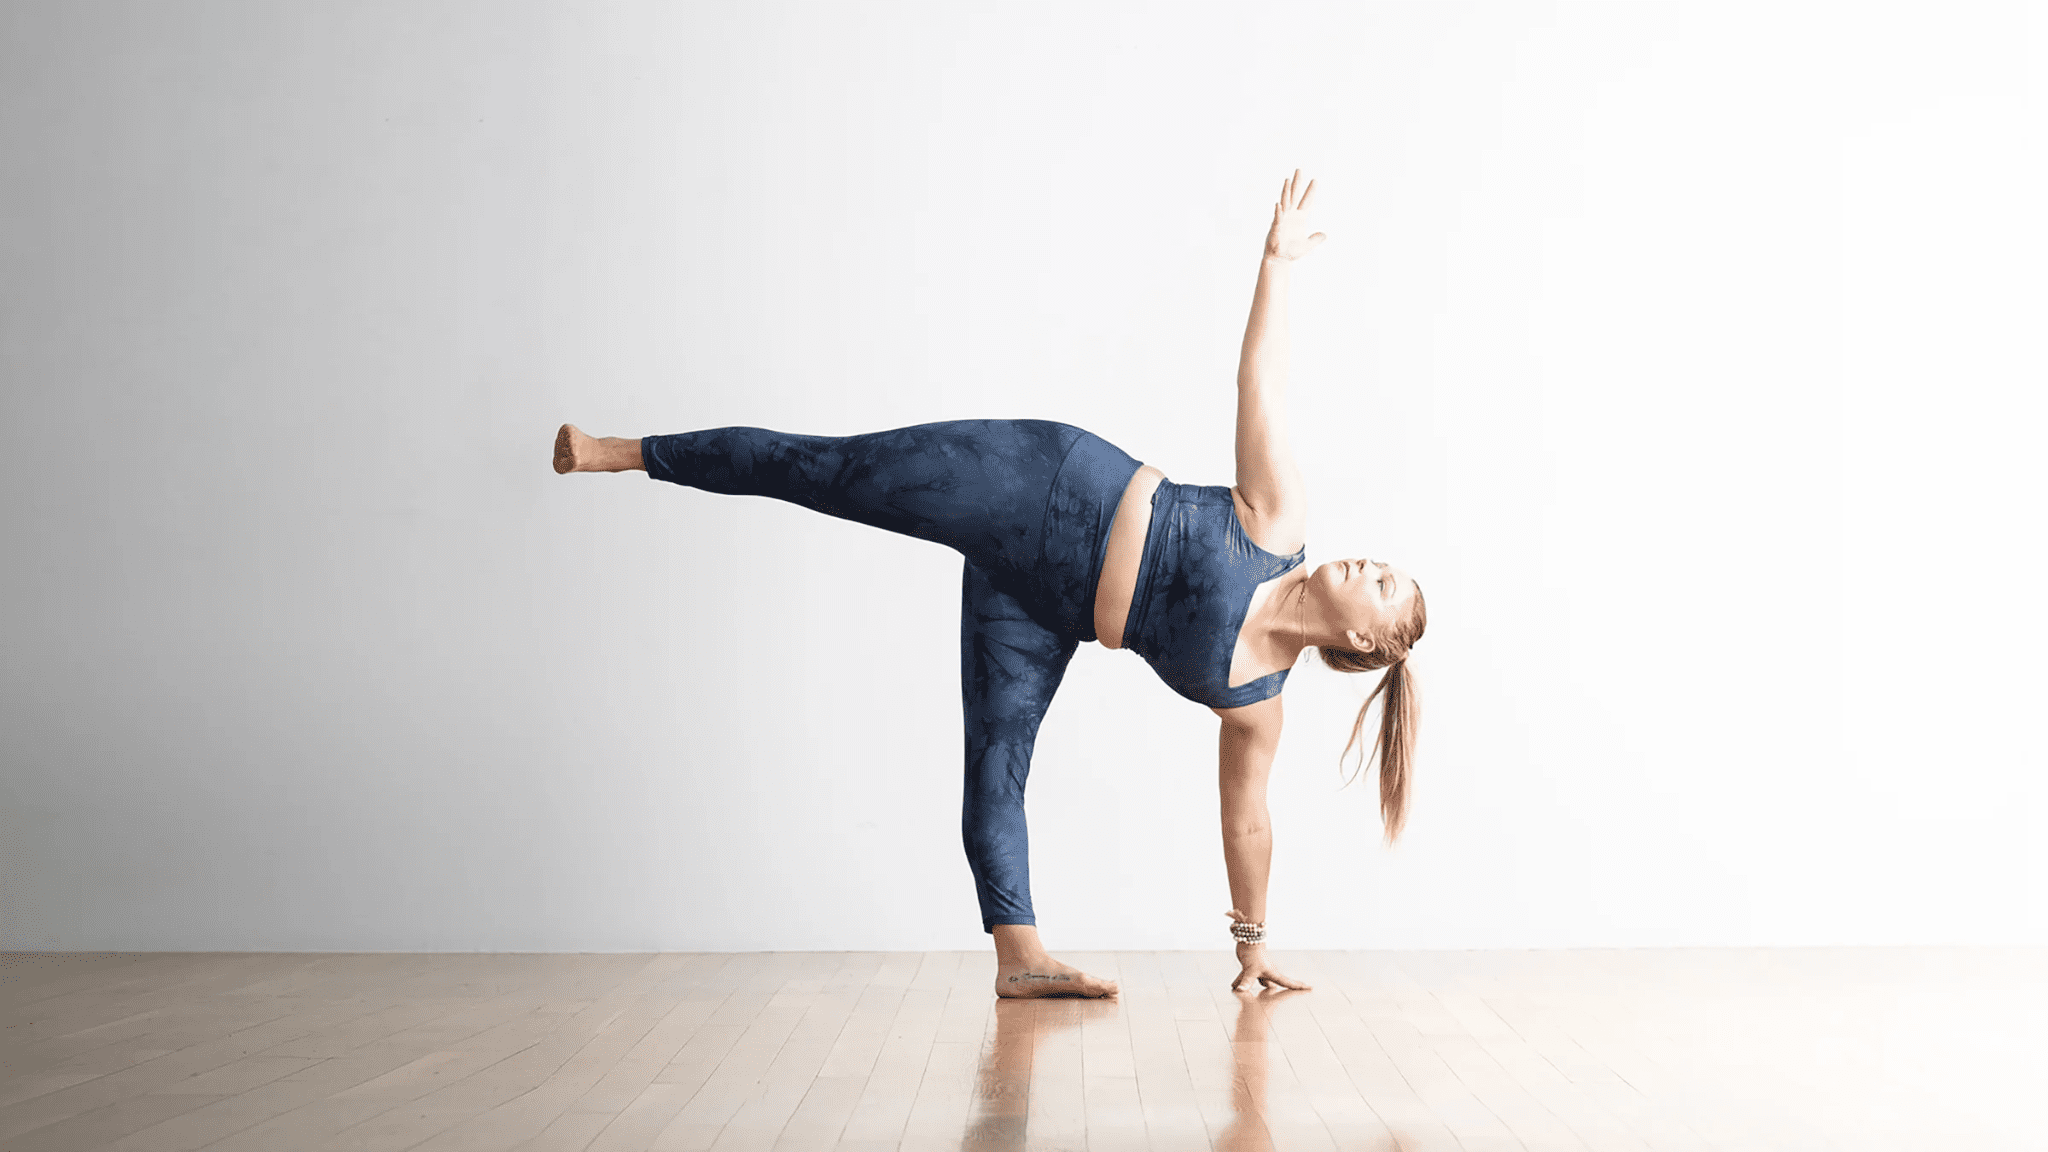 Bakasana: 5 Common Mistakes in Crow Pose (And How to Fix Them!)